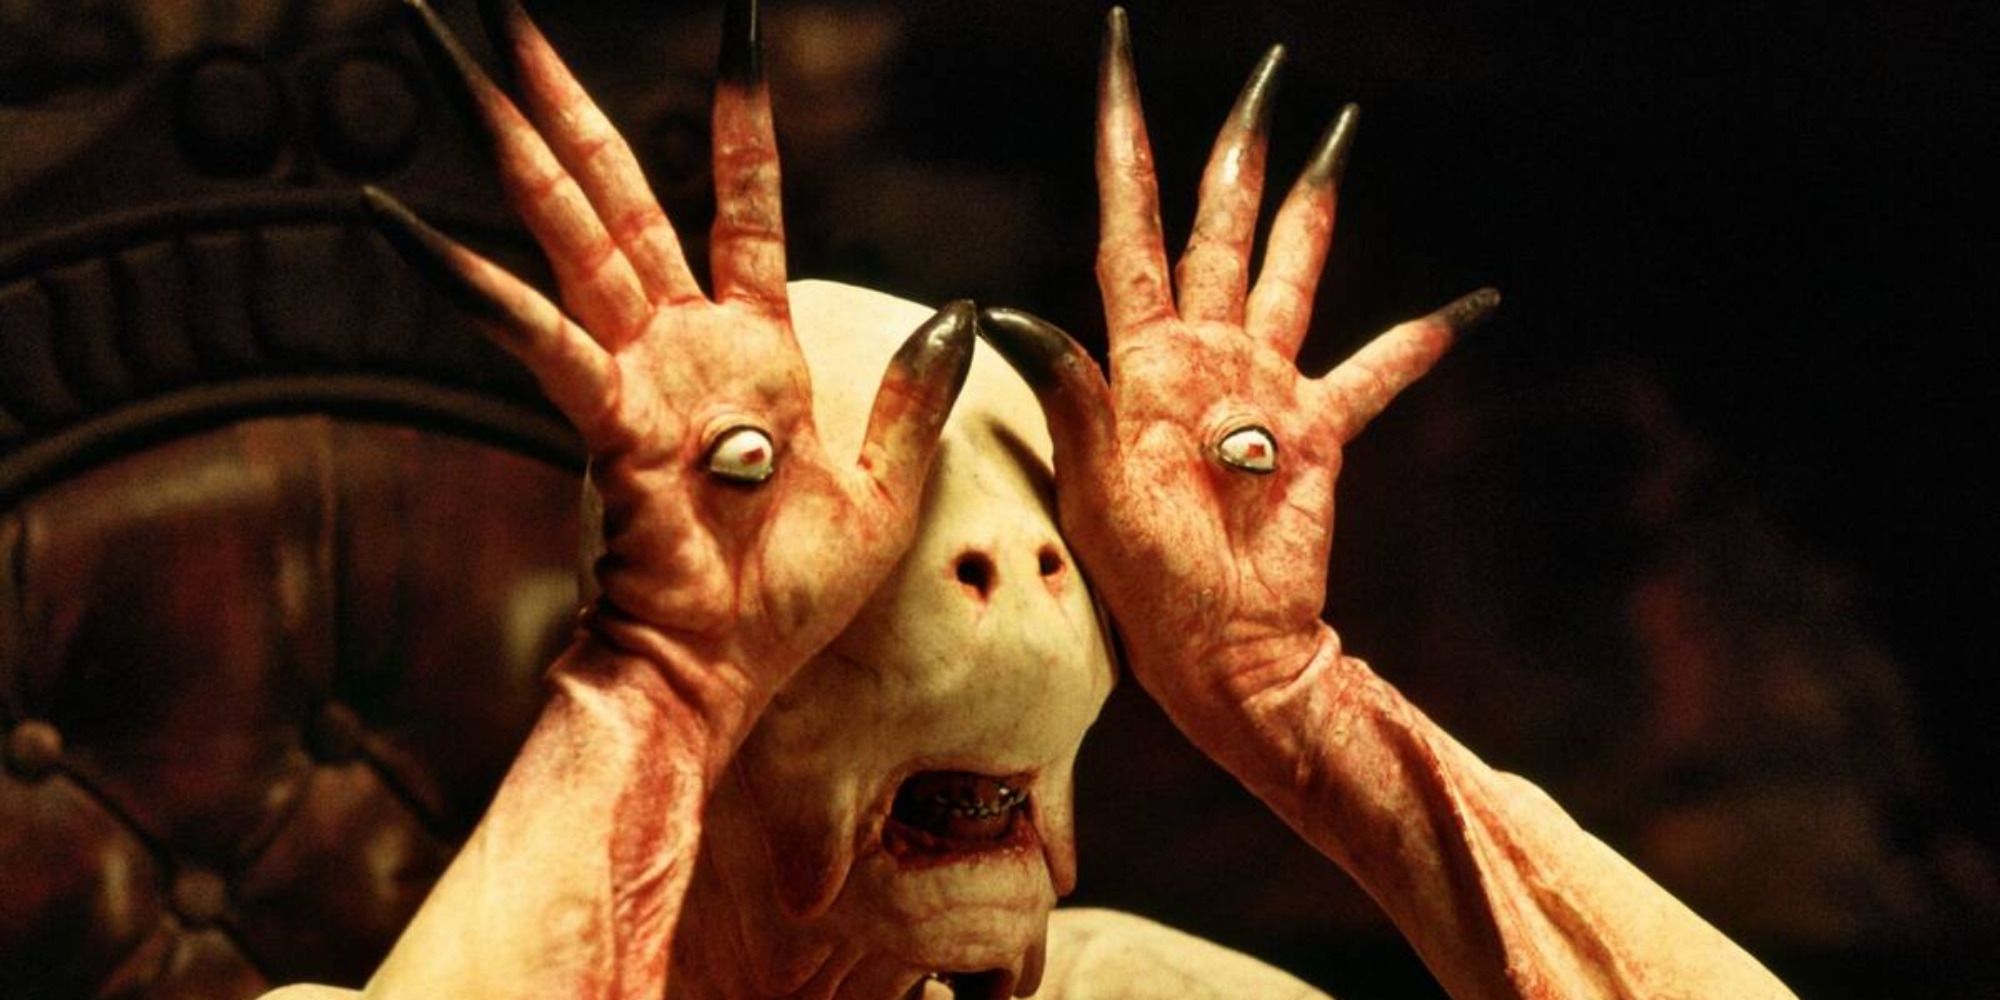 Pale Man from "Pan's Labyrinth" showing the eyes in his hands